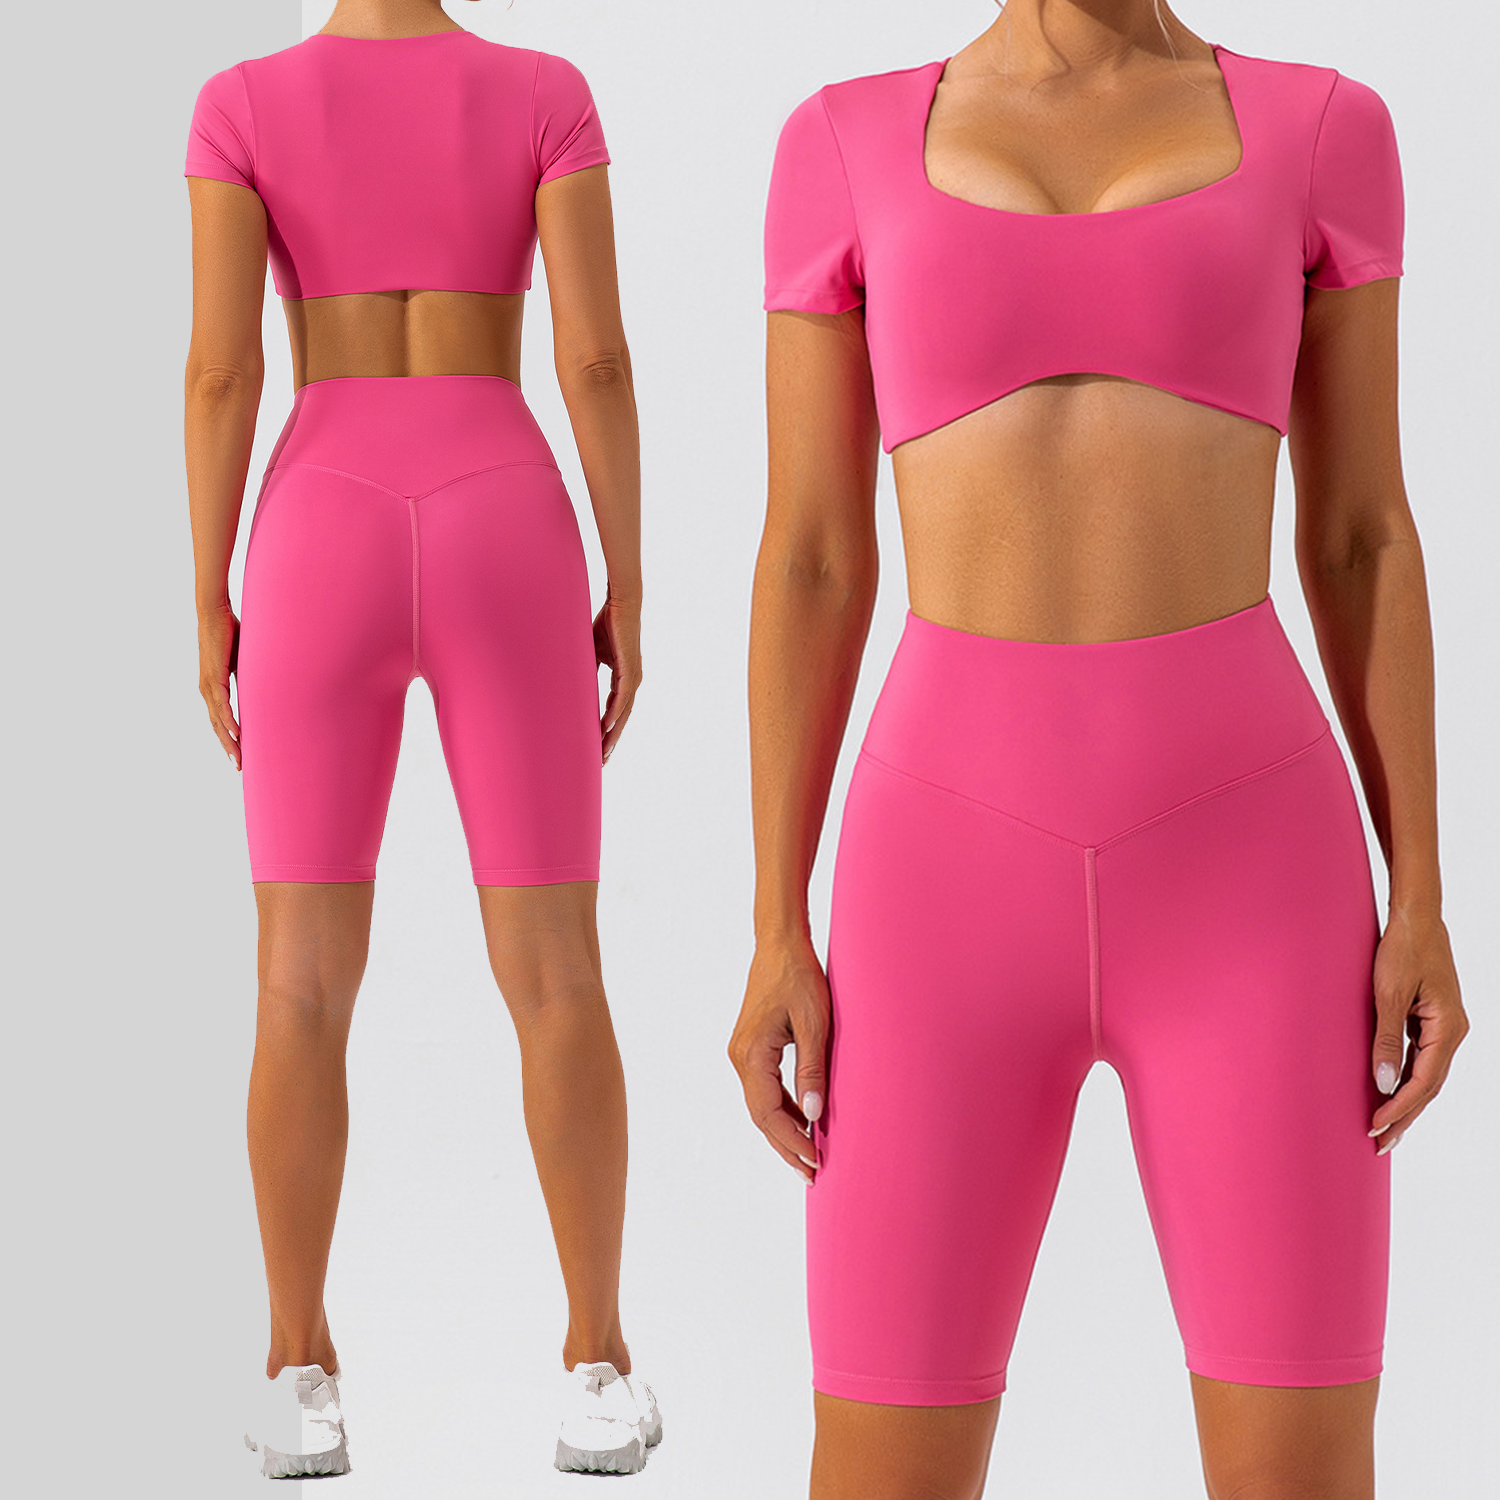 private label fitness apparel manufacturers